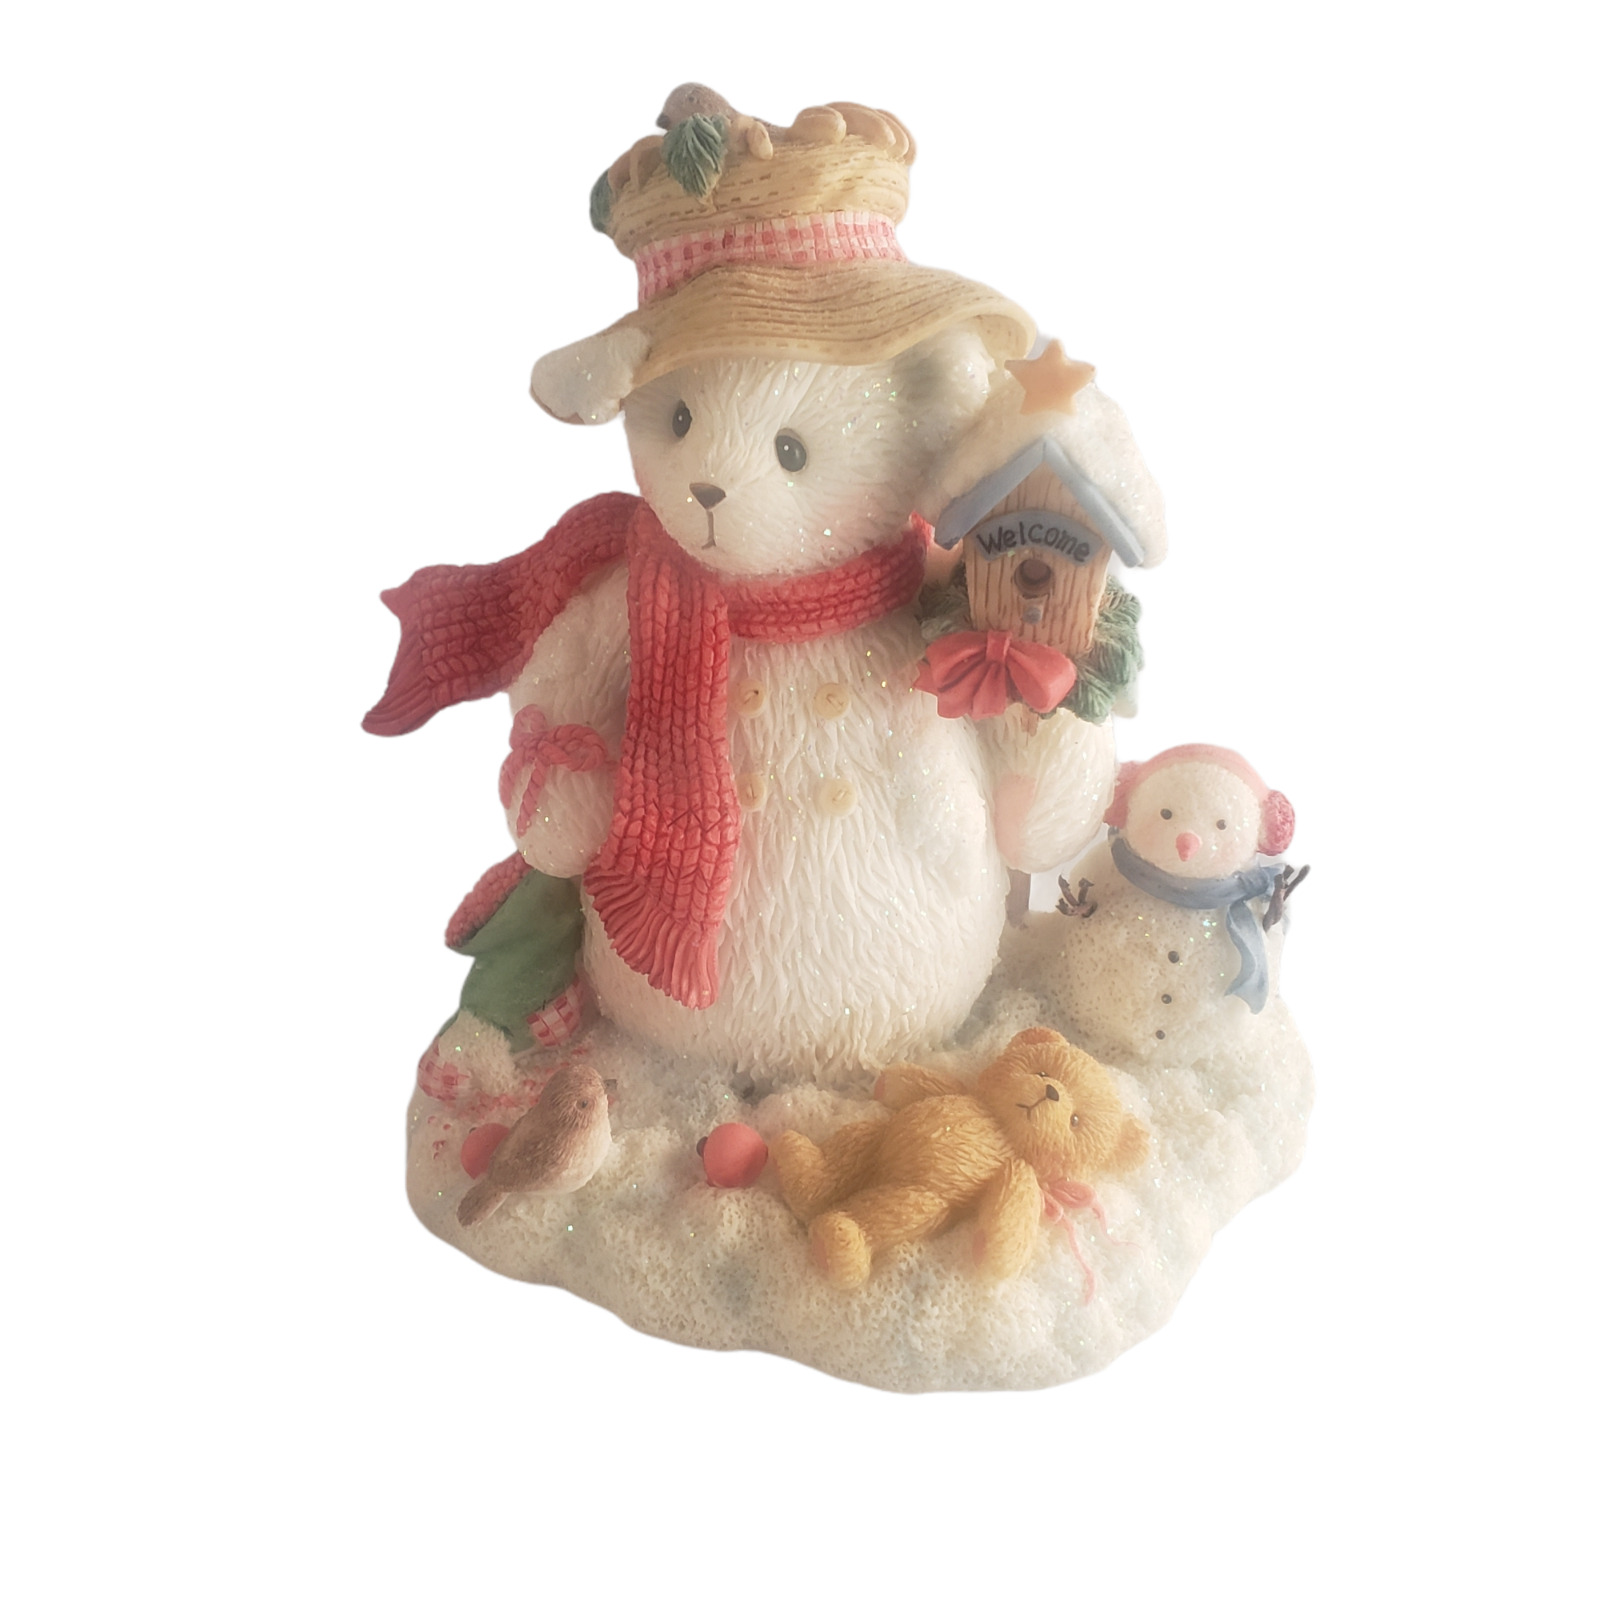 Cherished Teddies Merry "in The Meadow We Can Build A Snowman" 706906 2000